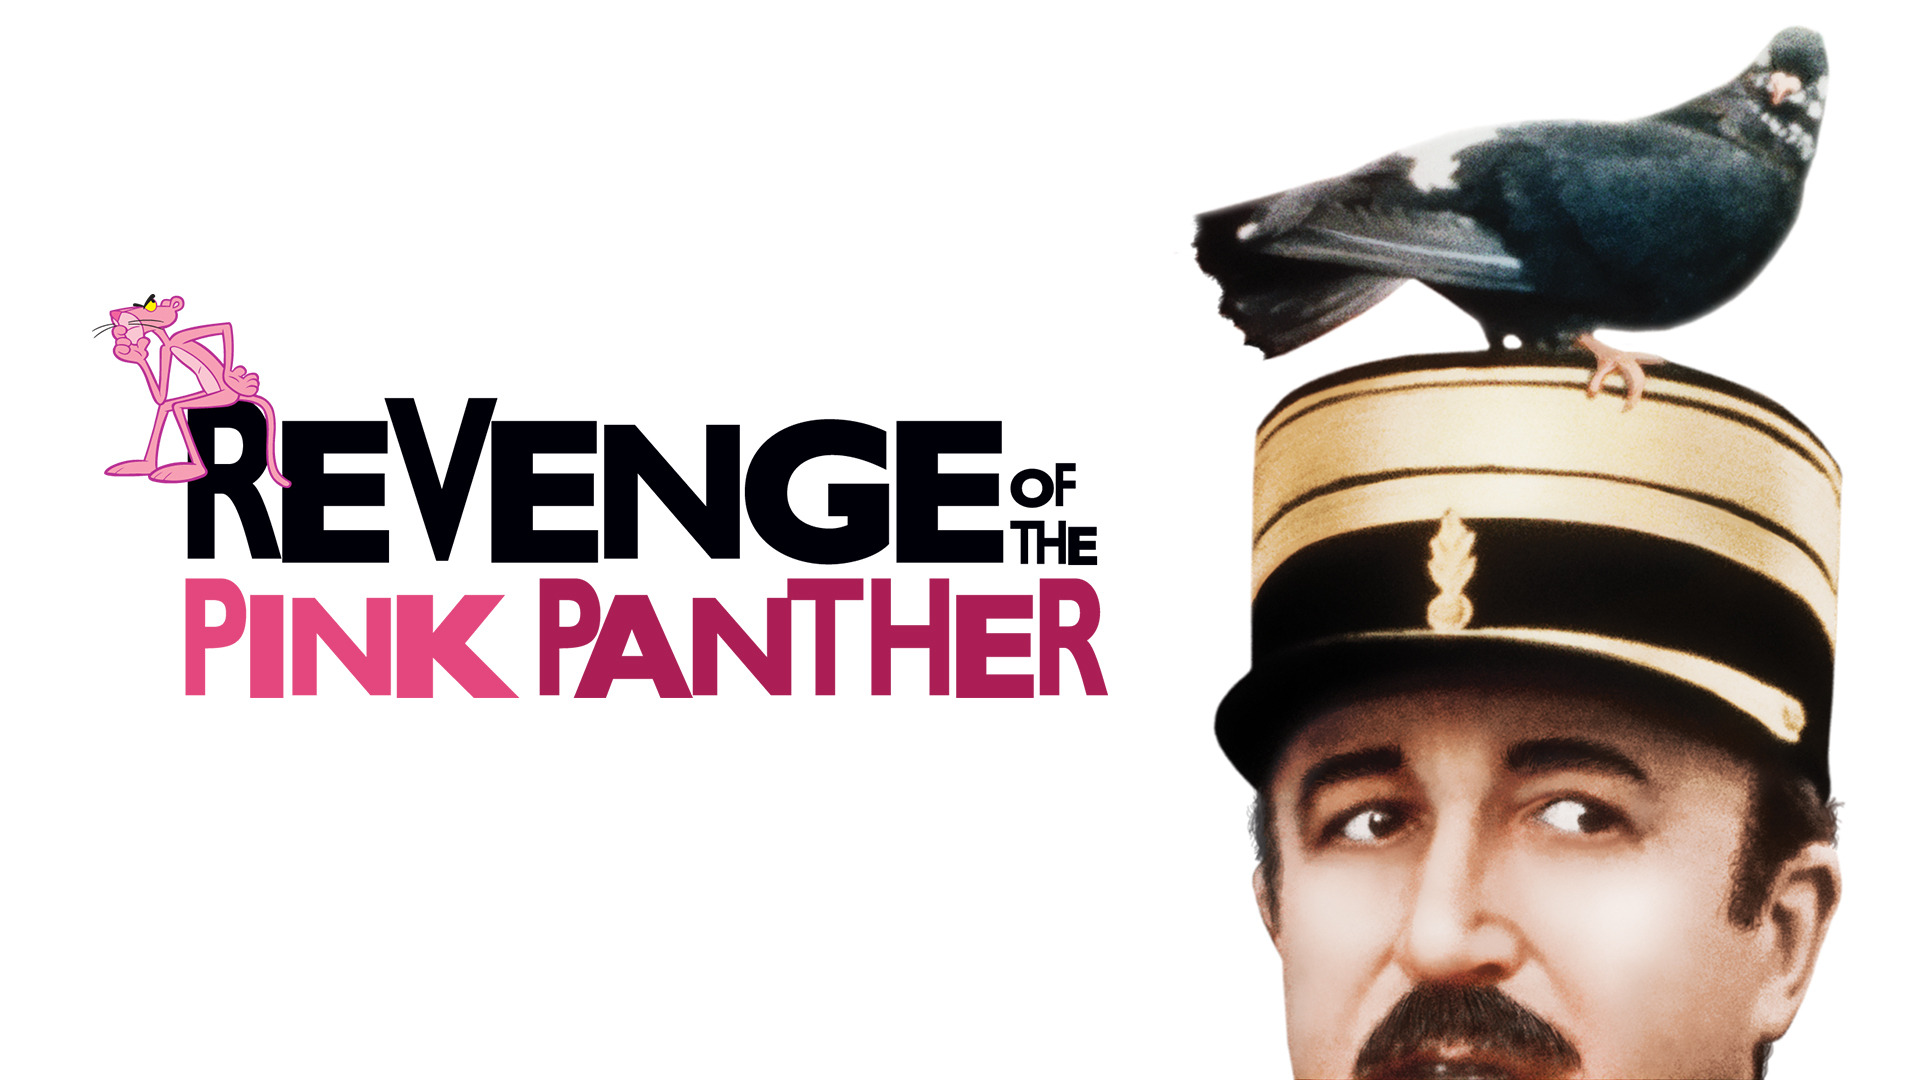 41-facts-about-the-movie-revenge-of-the-pink-panther